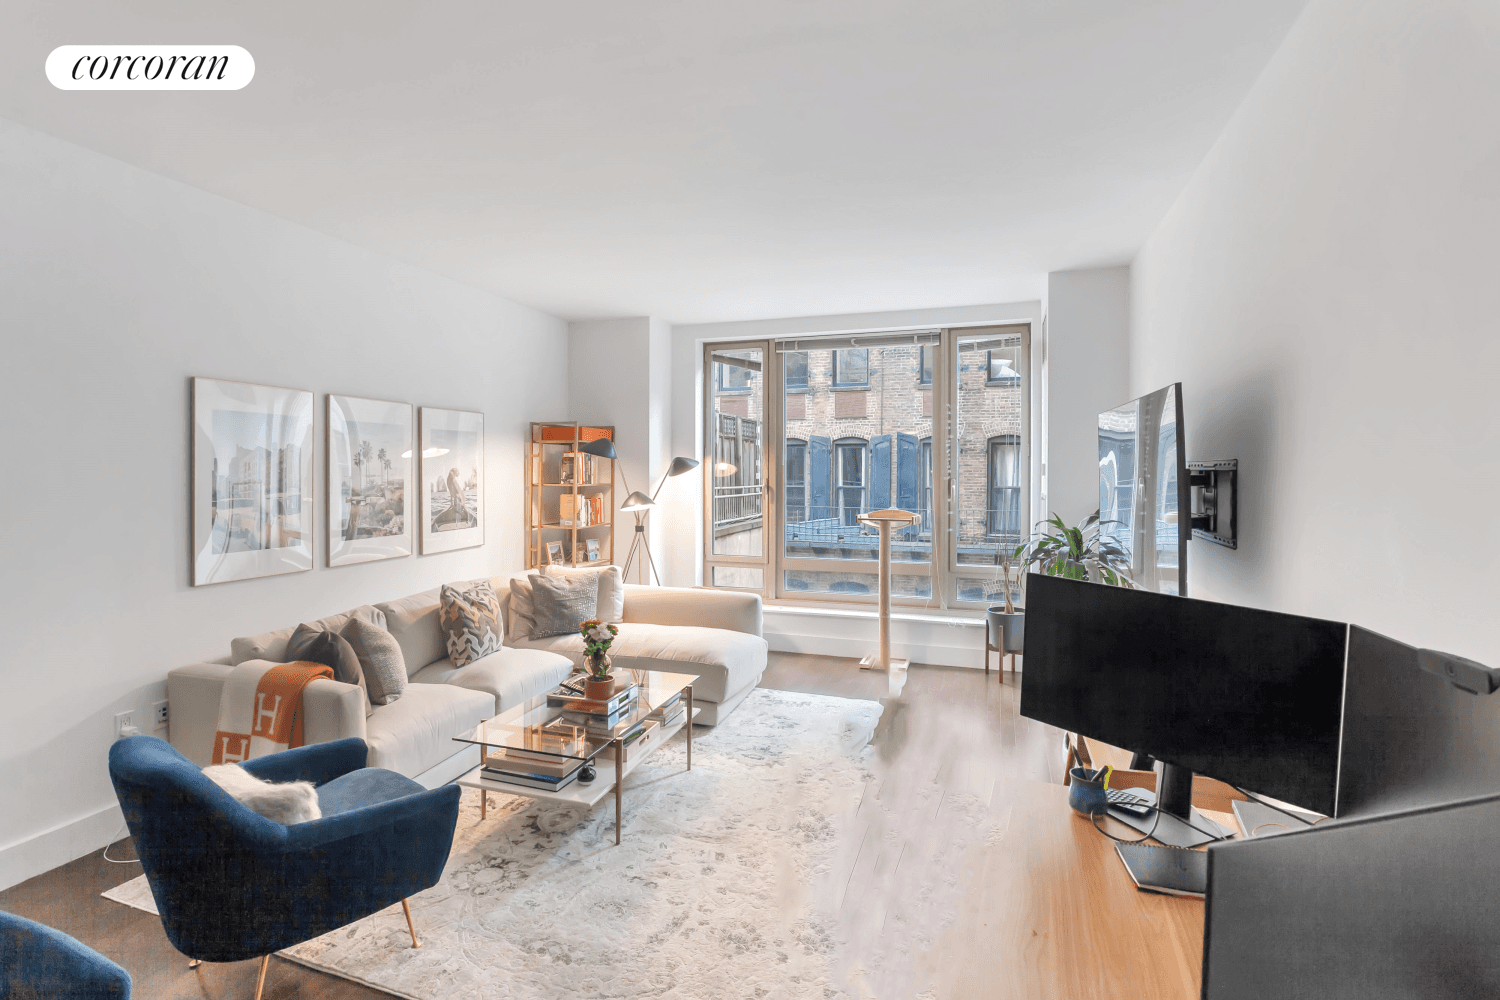 Discover the charm of this lovely 1 bedroom apartment boasting oversized windows that bring indirect light into the space.